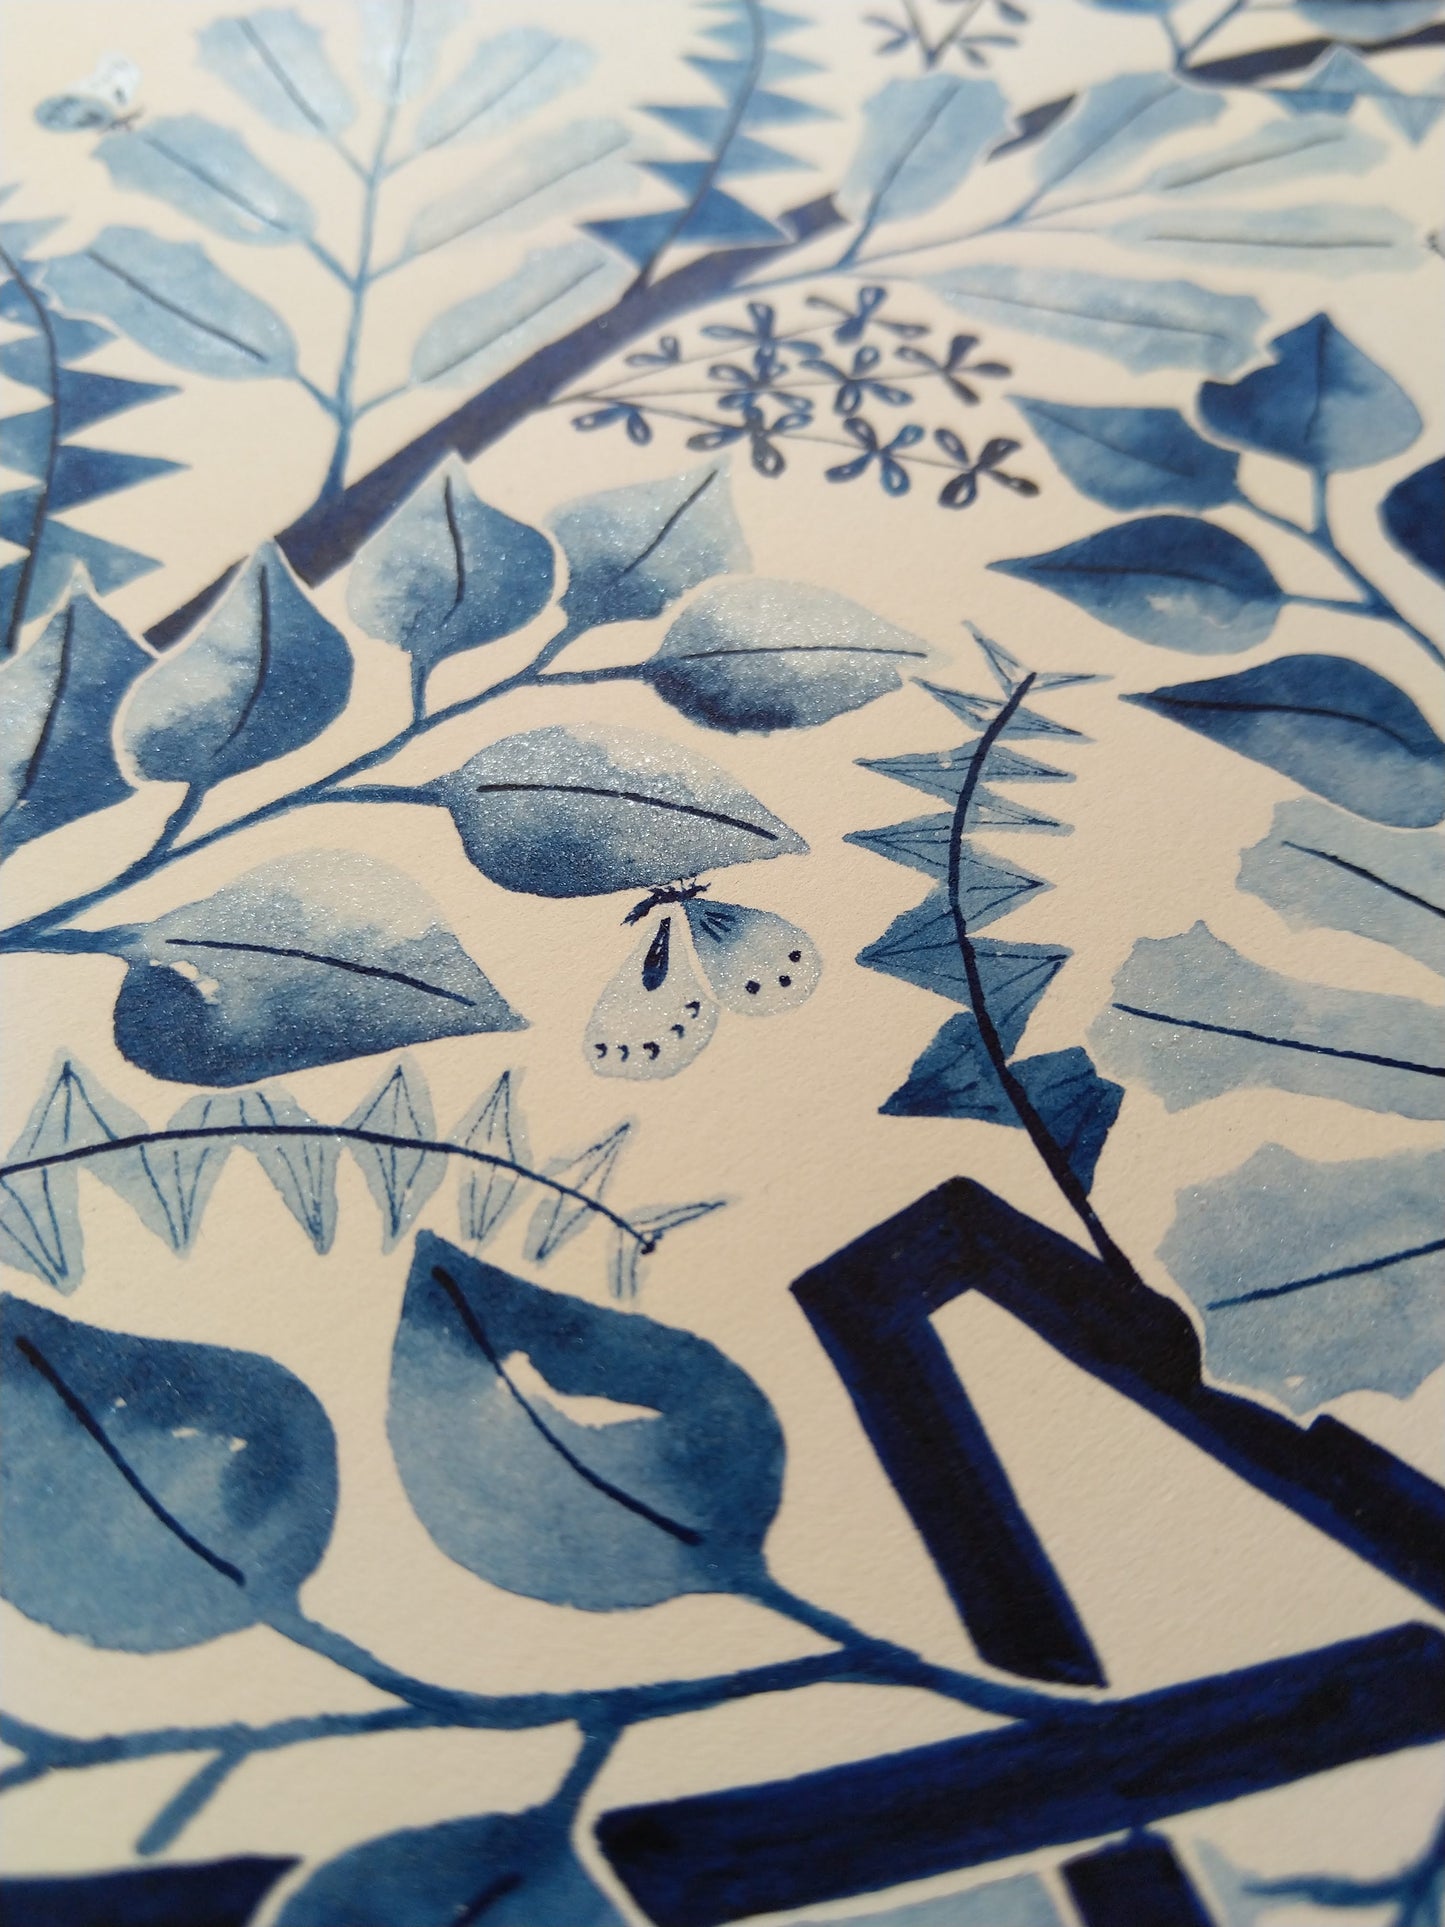 Watercolour Print - Courage (A study in blue)